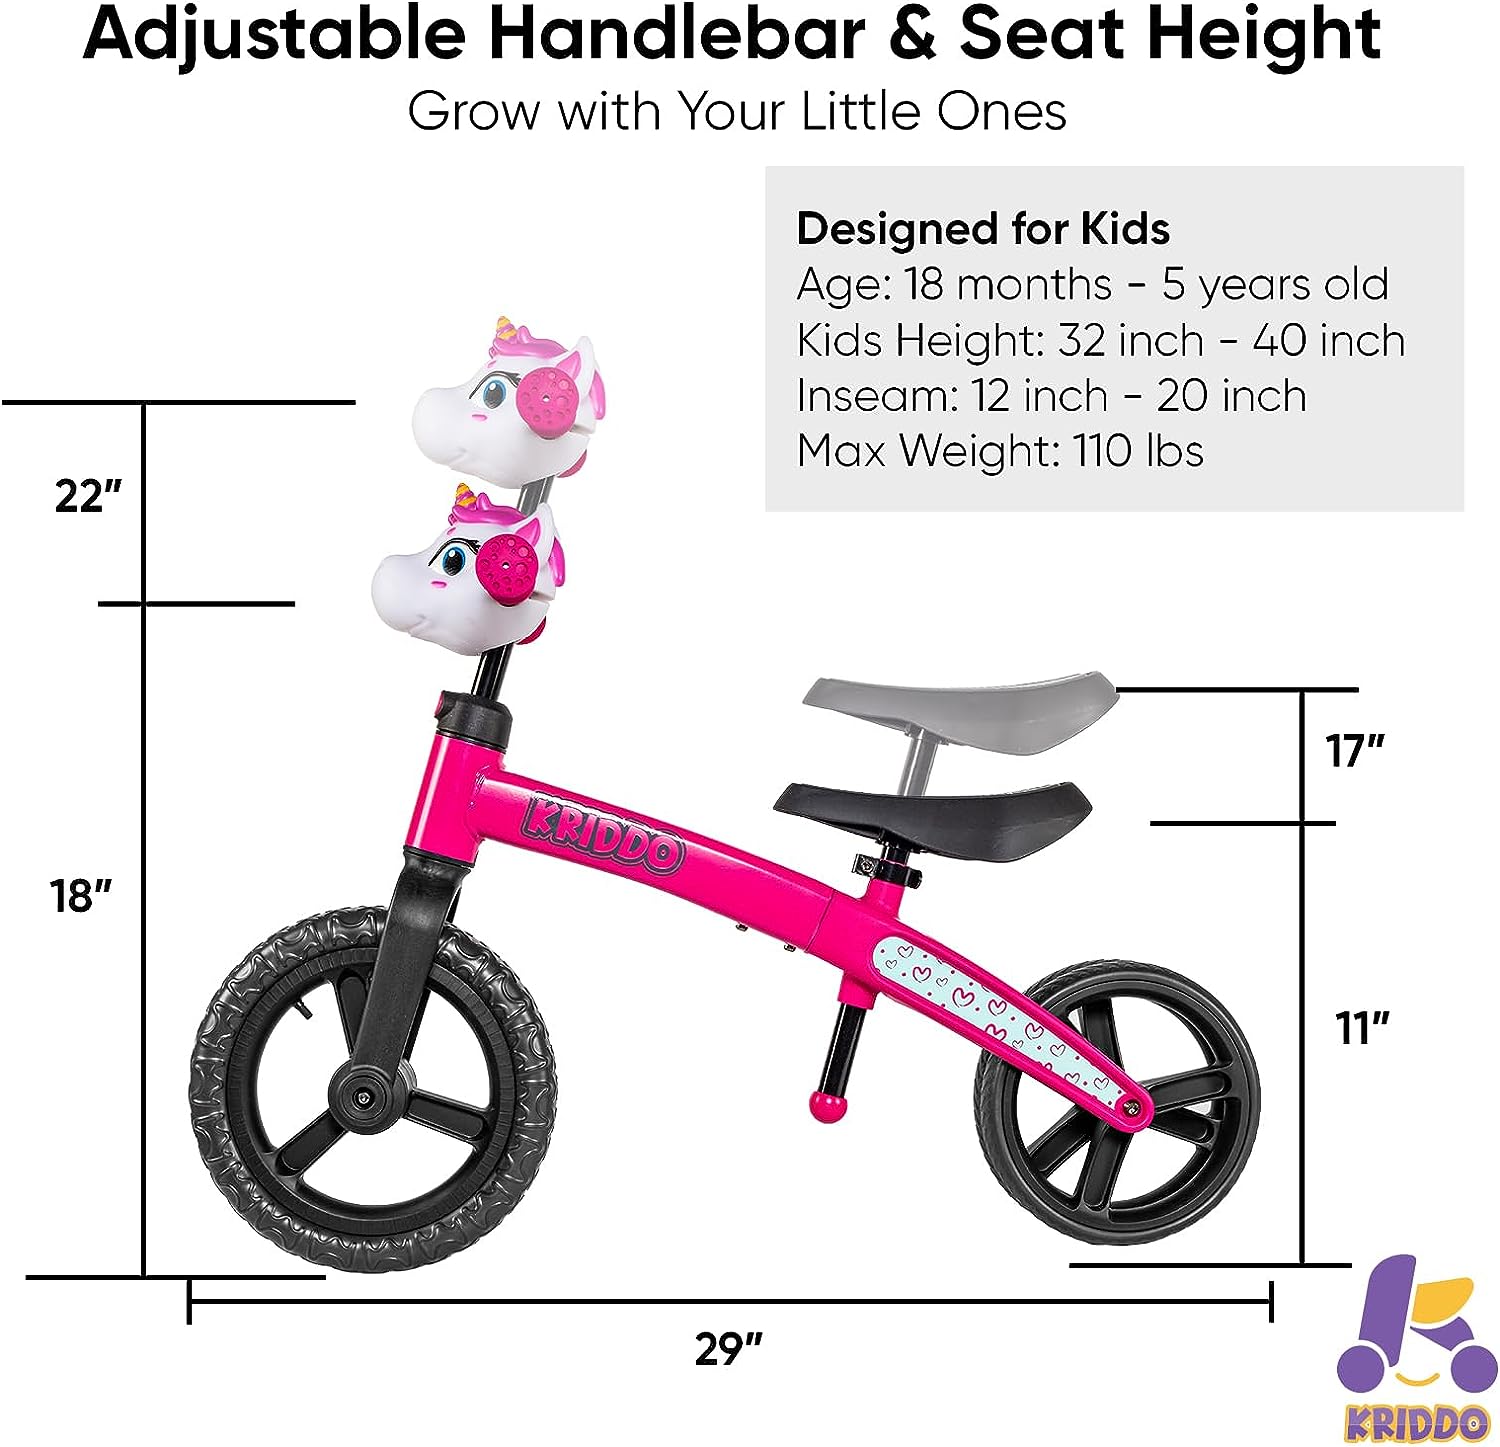 KRIDDO Toddler Balance Bike 2 Year Old, Age 18 Months to 5 Years Old, Early Learning Interactive Push Bicycle with Steady Balancing and Footrest, Gift for 2-5 Boys Girls, Pink Dual